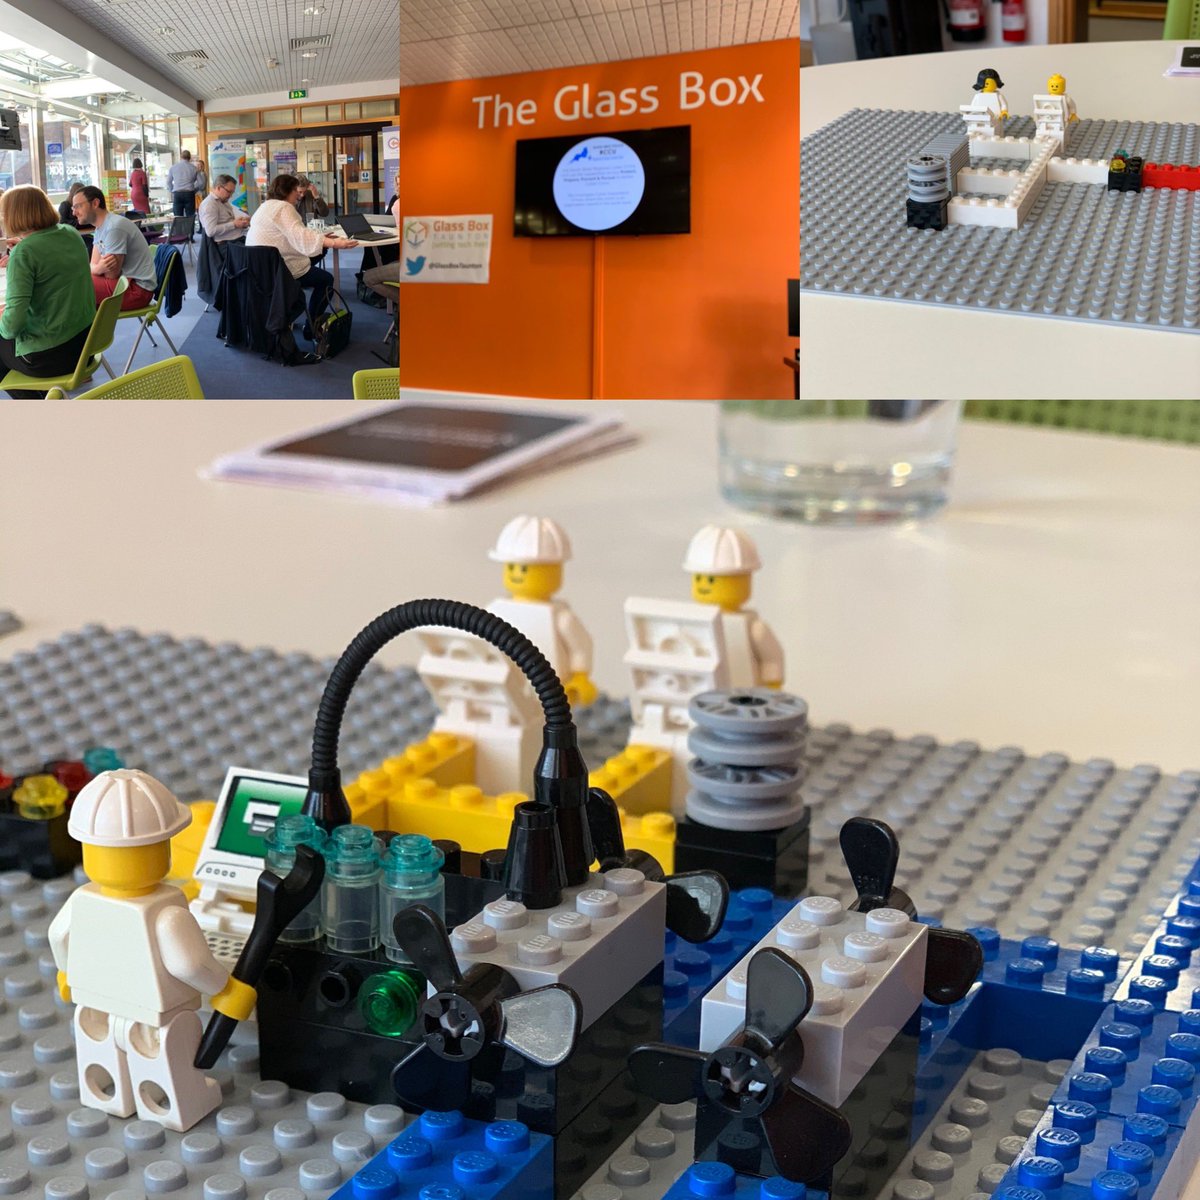 Having a fun morning at the @TauntonChamber cyber security event at @GlassBoxTaunton making new connections and playing with Lego #SWRCCULego #GlassBoxTaunton